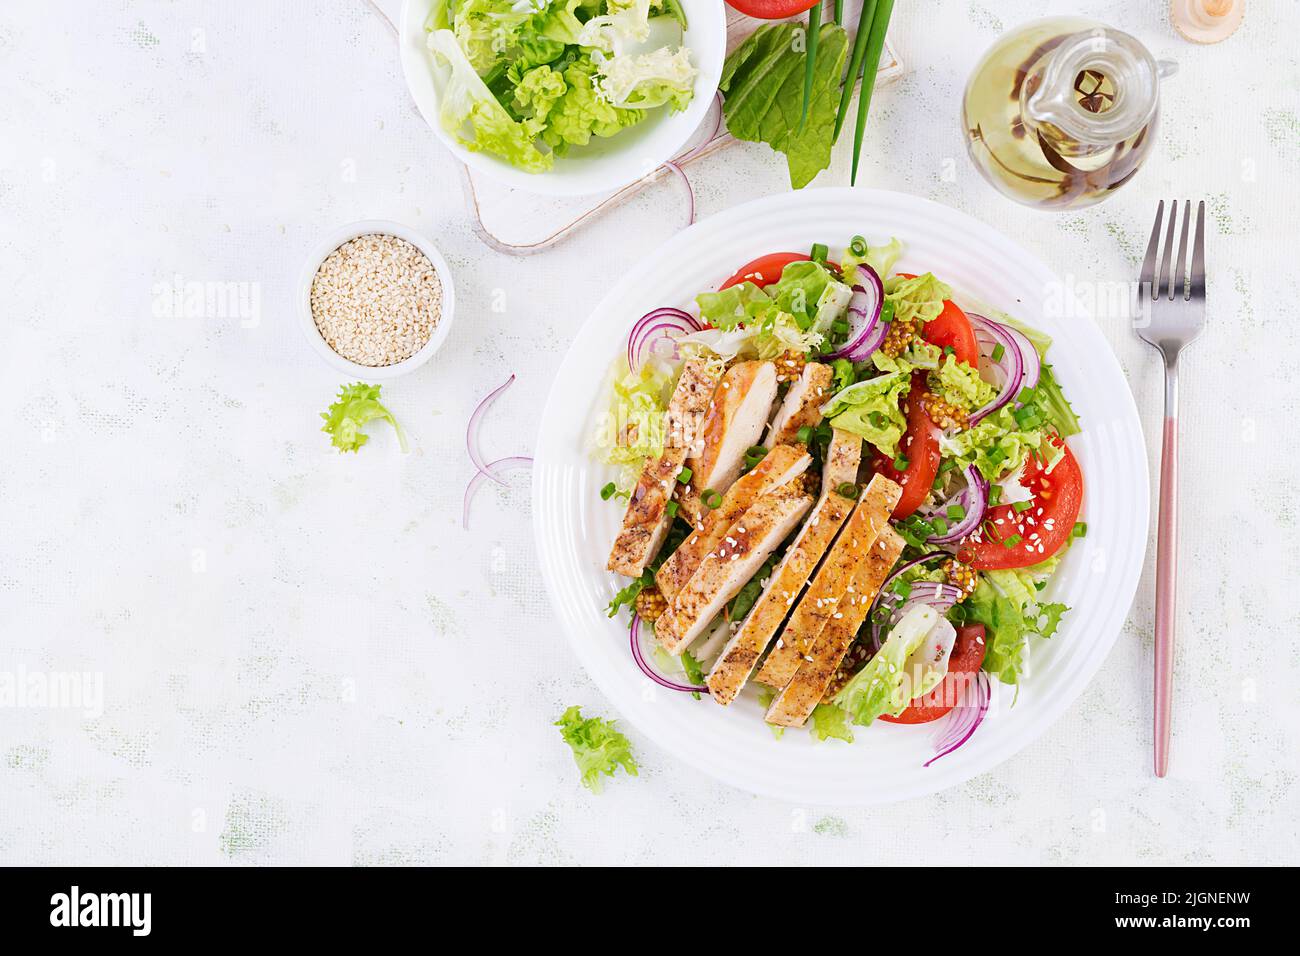 Salad with grilled chicken breast. Fresh vegetable salad with chicken meat. Healthy lunch menu. Diet food. Top view, flat lay Stock Photo